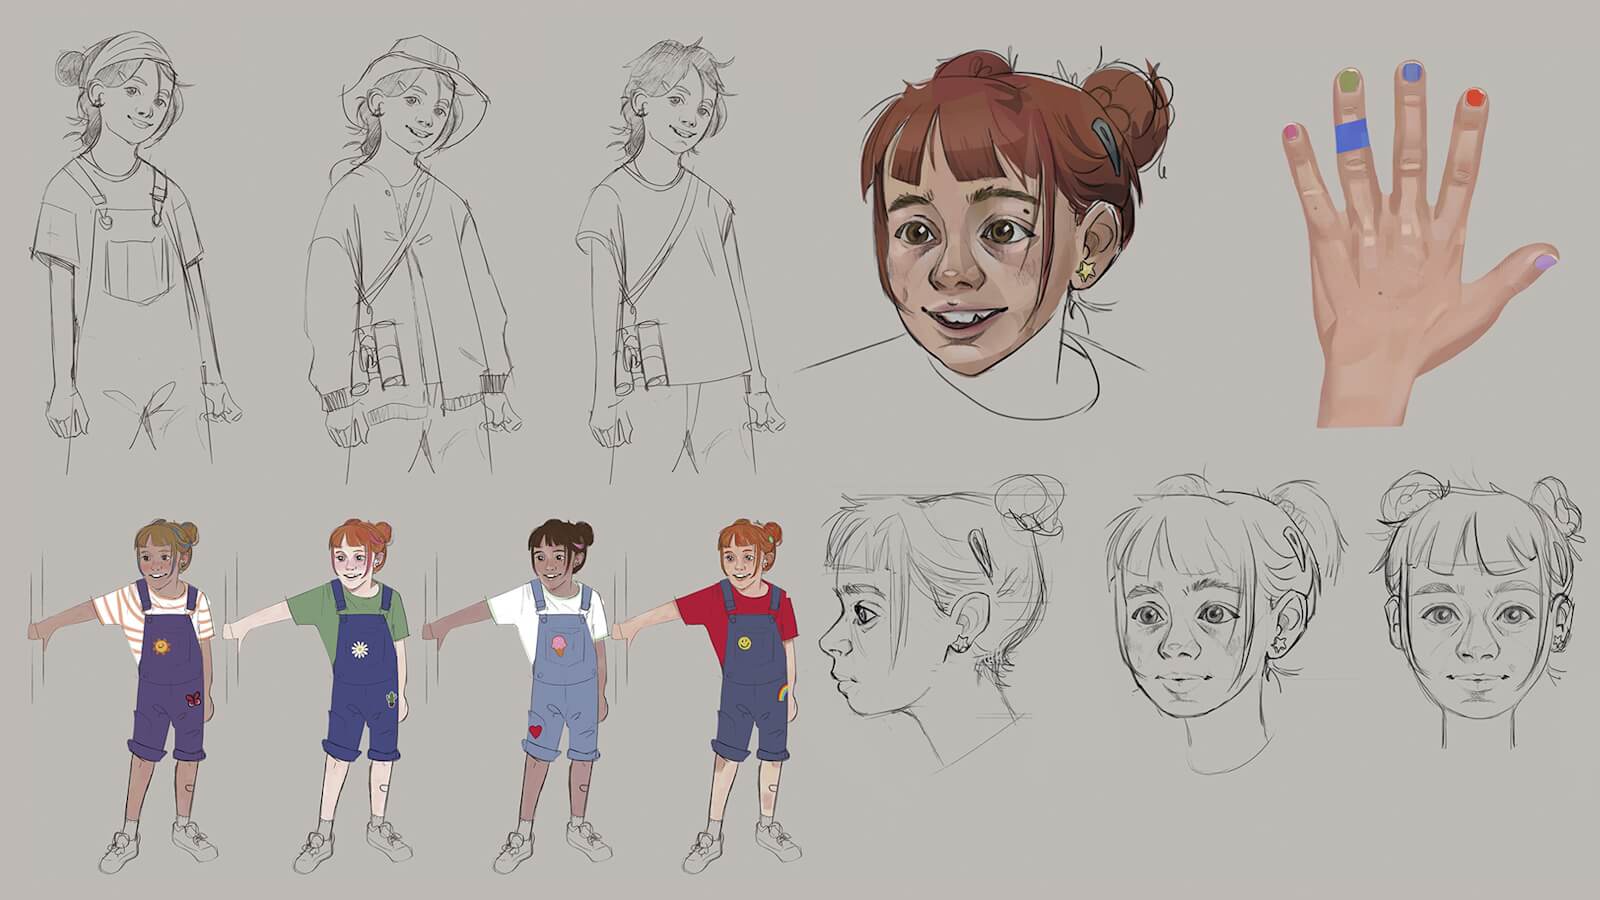 Concept art depicting Hailey, the protagonist of the film, in the early stages of development.